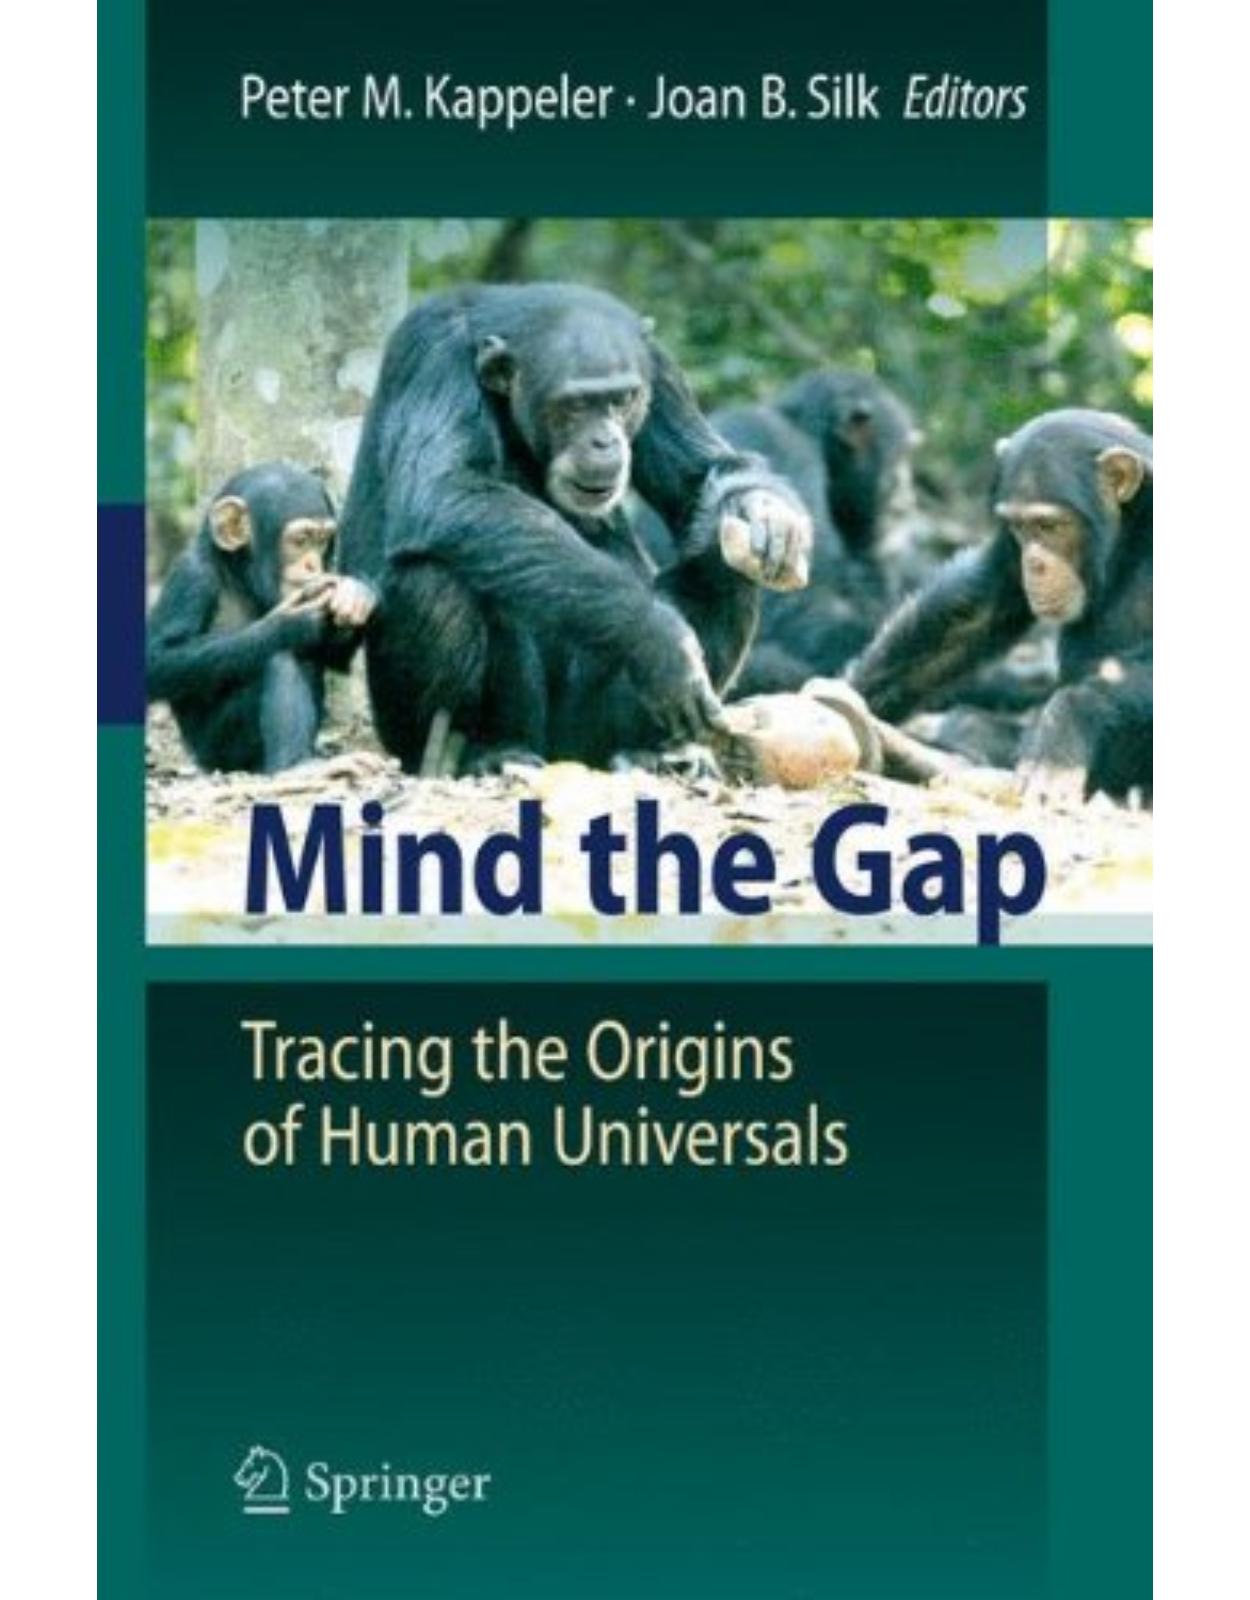 Mind the Gap: Tracing the Origins of Human Universals